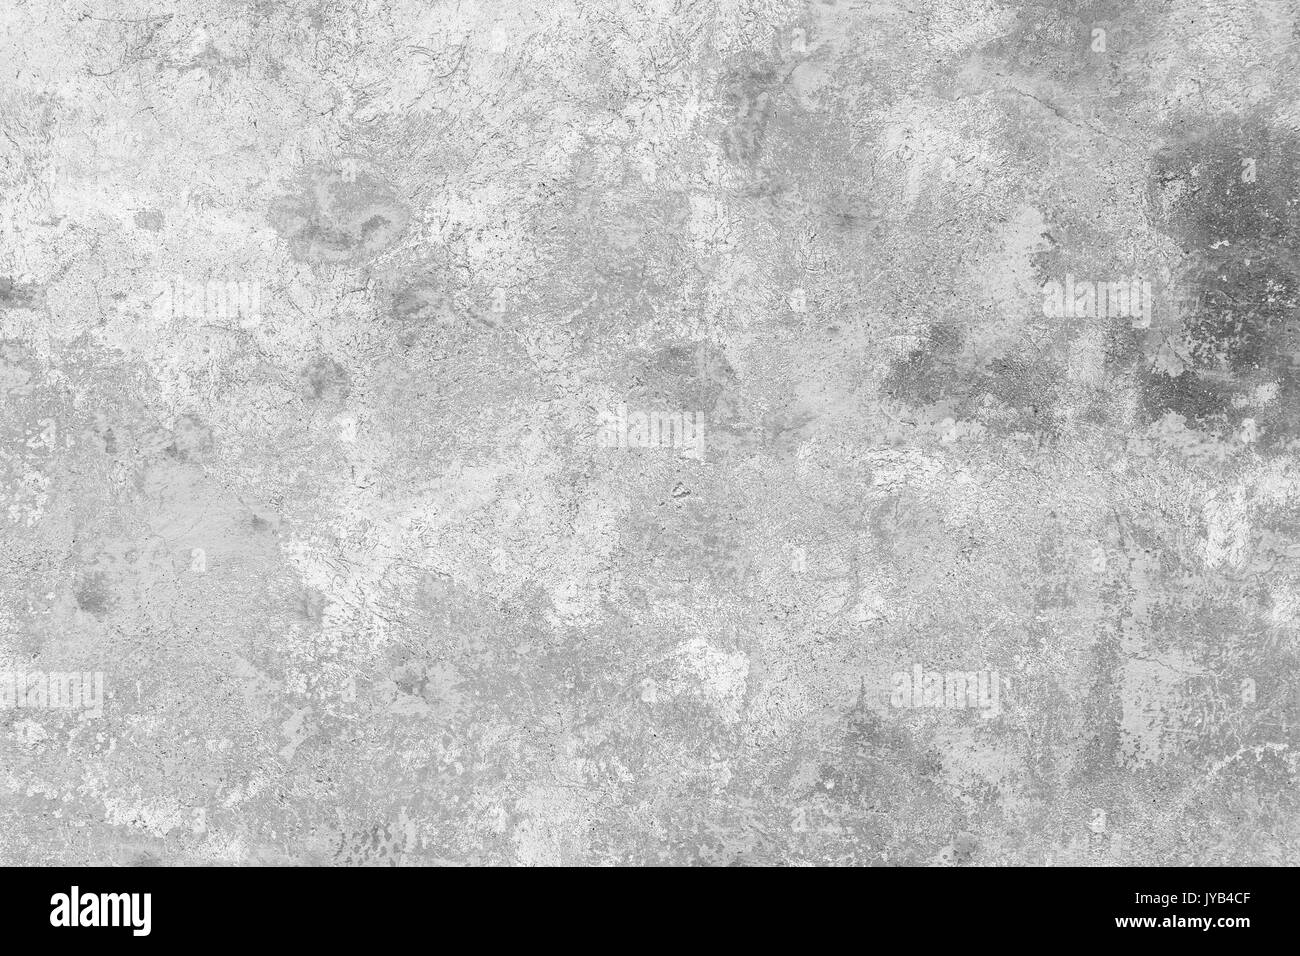 Close-up of a weathered and aged concrete wall, paint partly peeled off. Texture background in black and white. Stock Photo